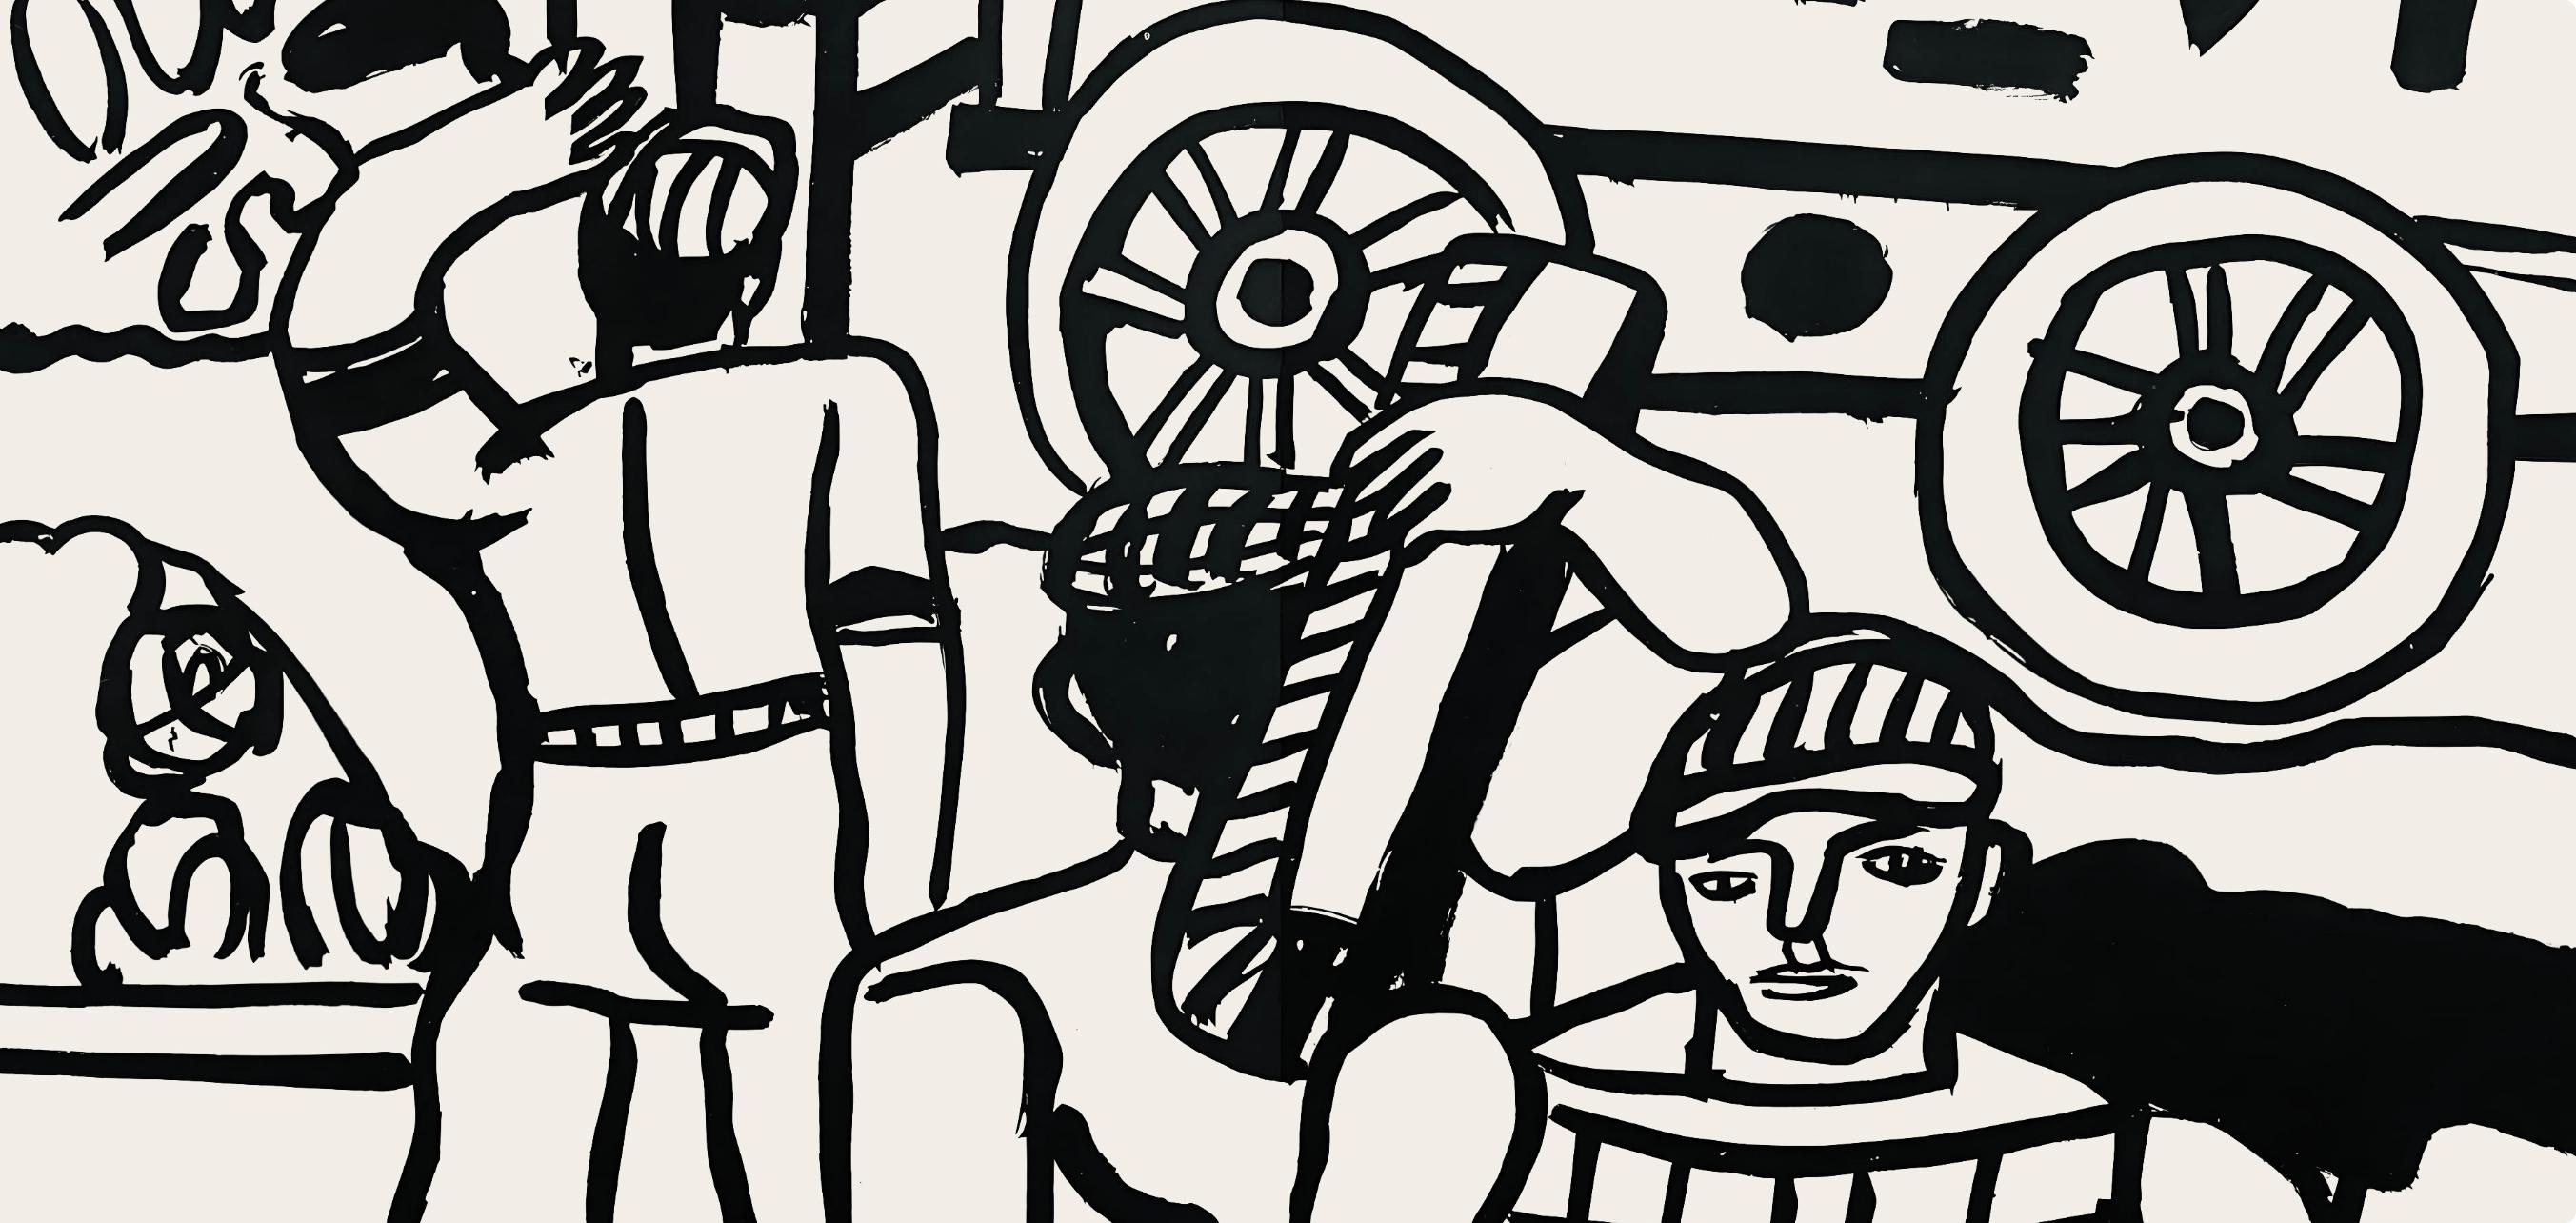 Léger, Composition, mes voyages (after) - Print by Fernand Léger